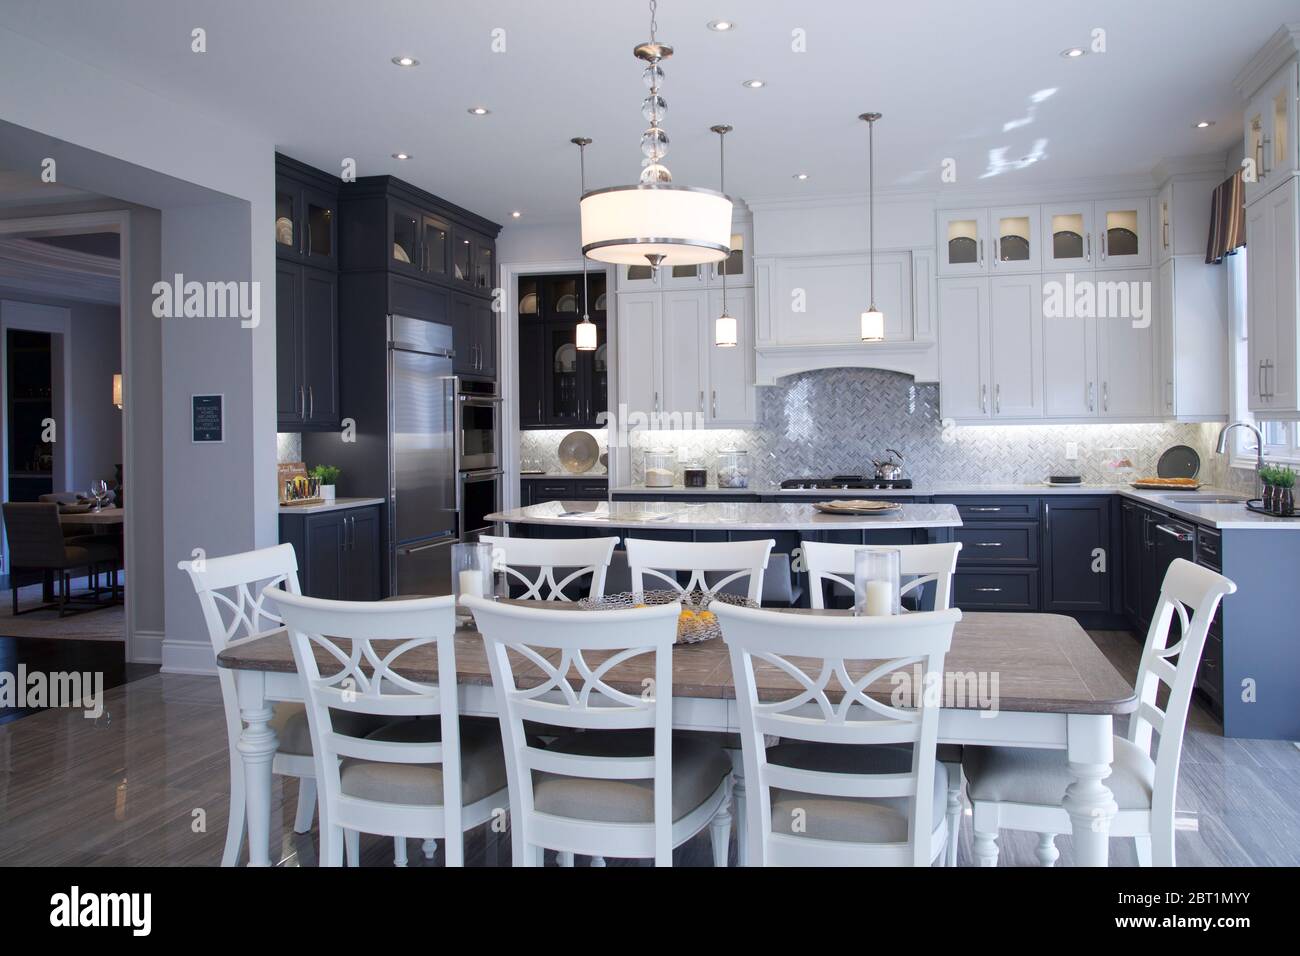 Kleinburg, Ontario / Canada - 08/31/2019: Front view of a newly designed kitchen and a dining table inside a model home Stock Photo